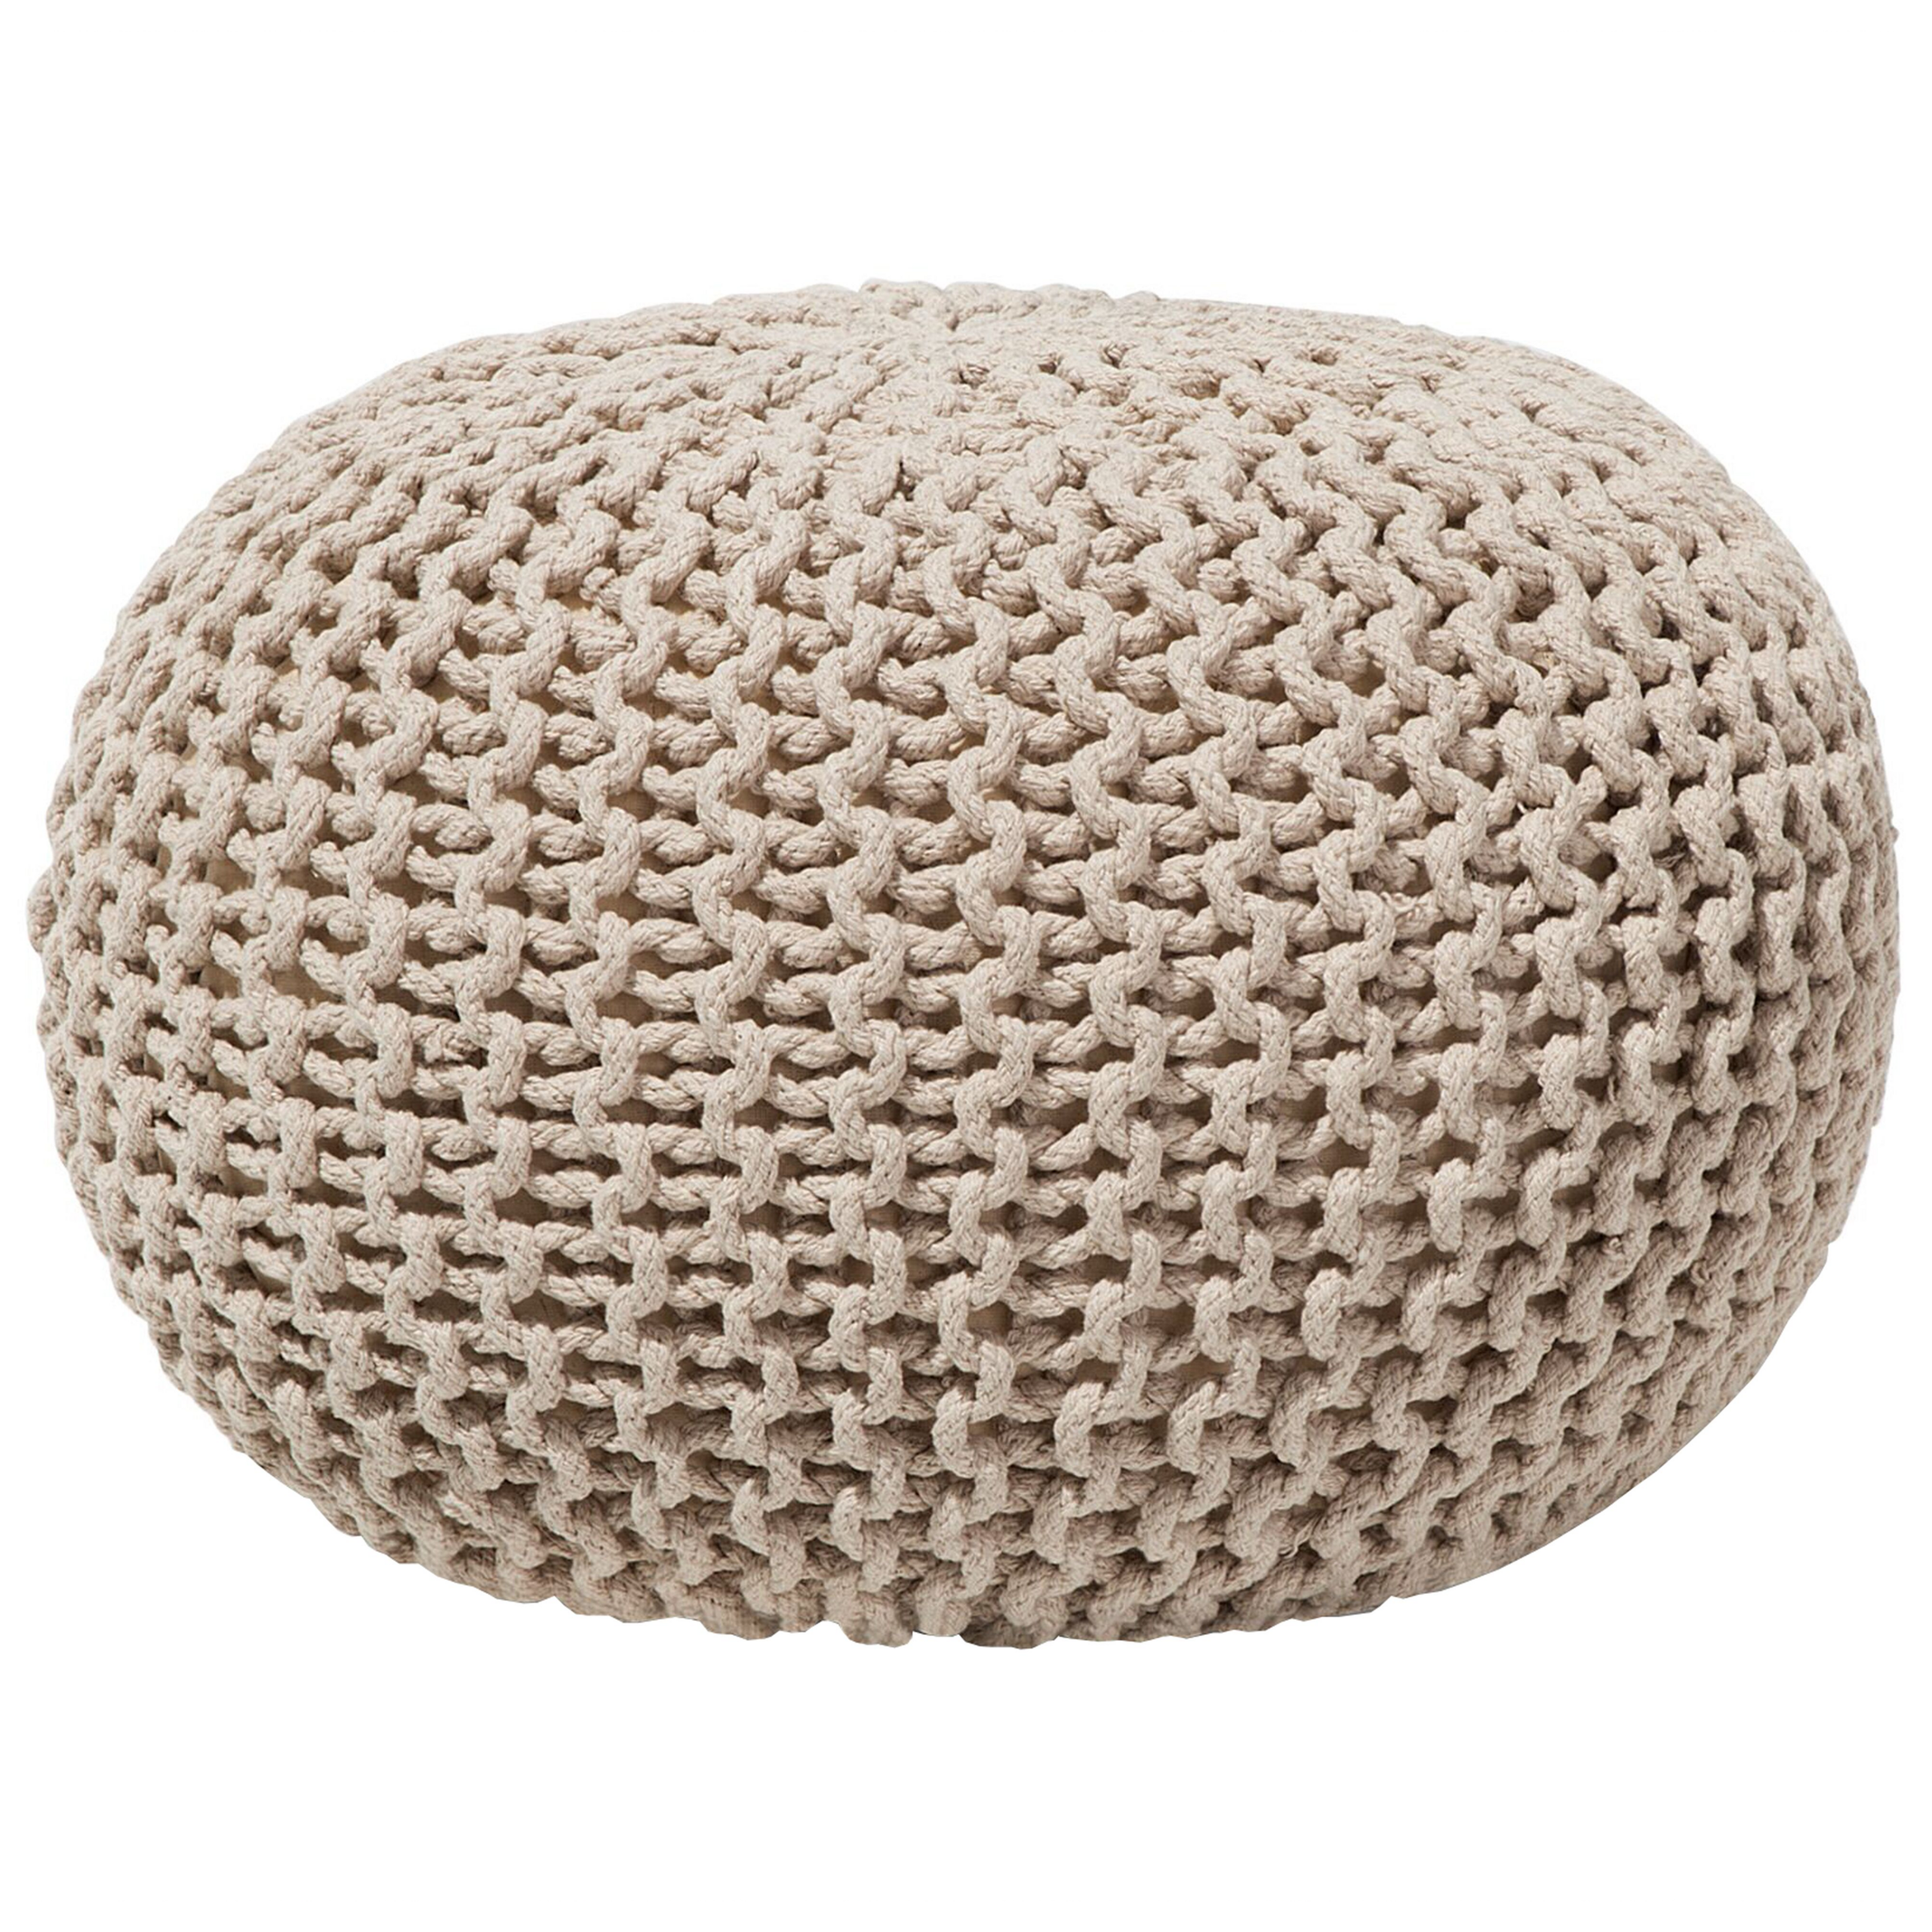 Beliani Pouf Ottoman Beige Knitted Cotton EPS Beads Filling Round Small Footstool 50 x 35 cm